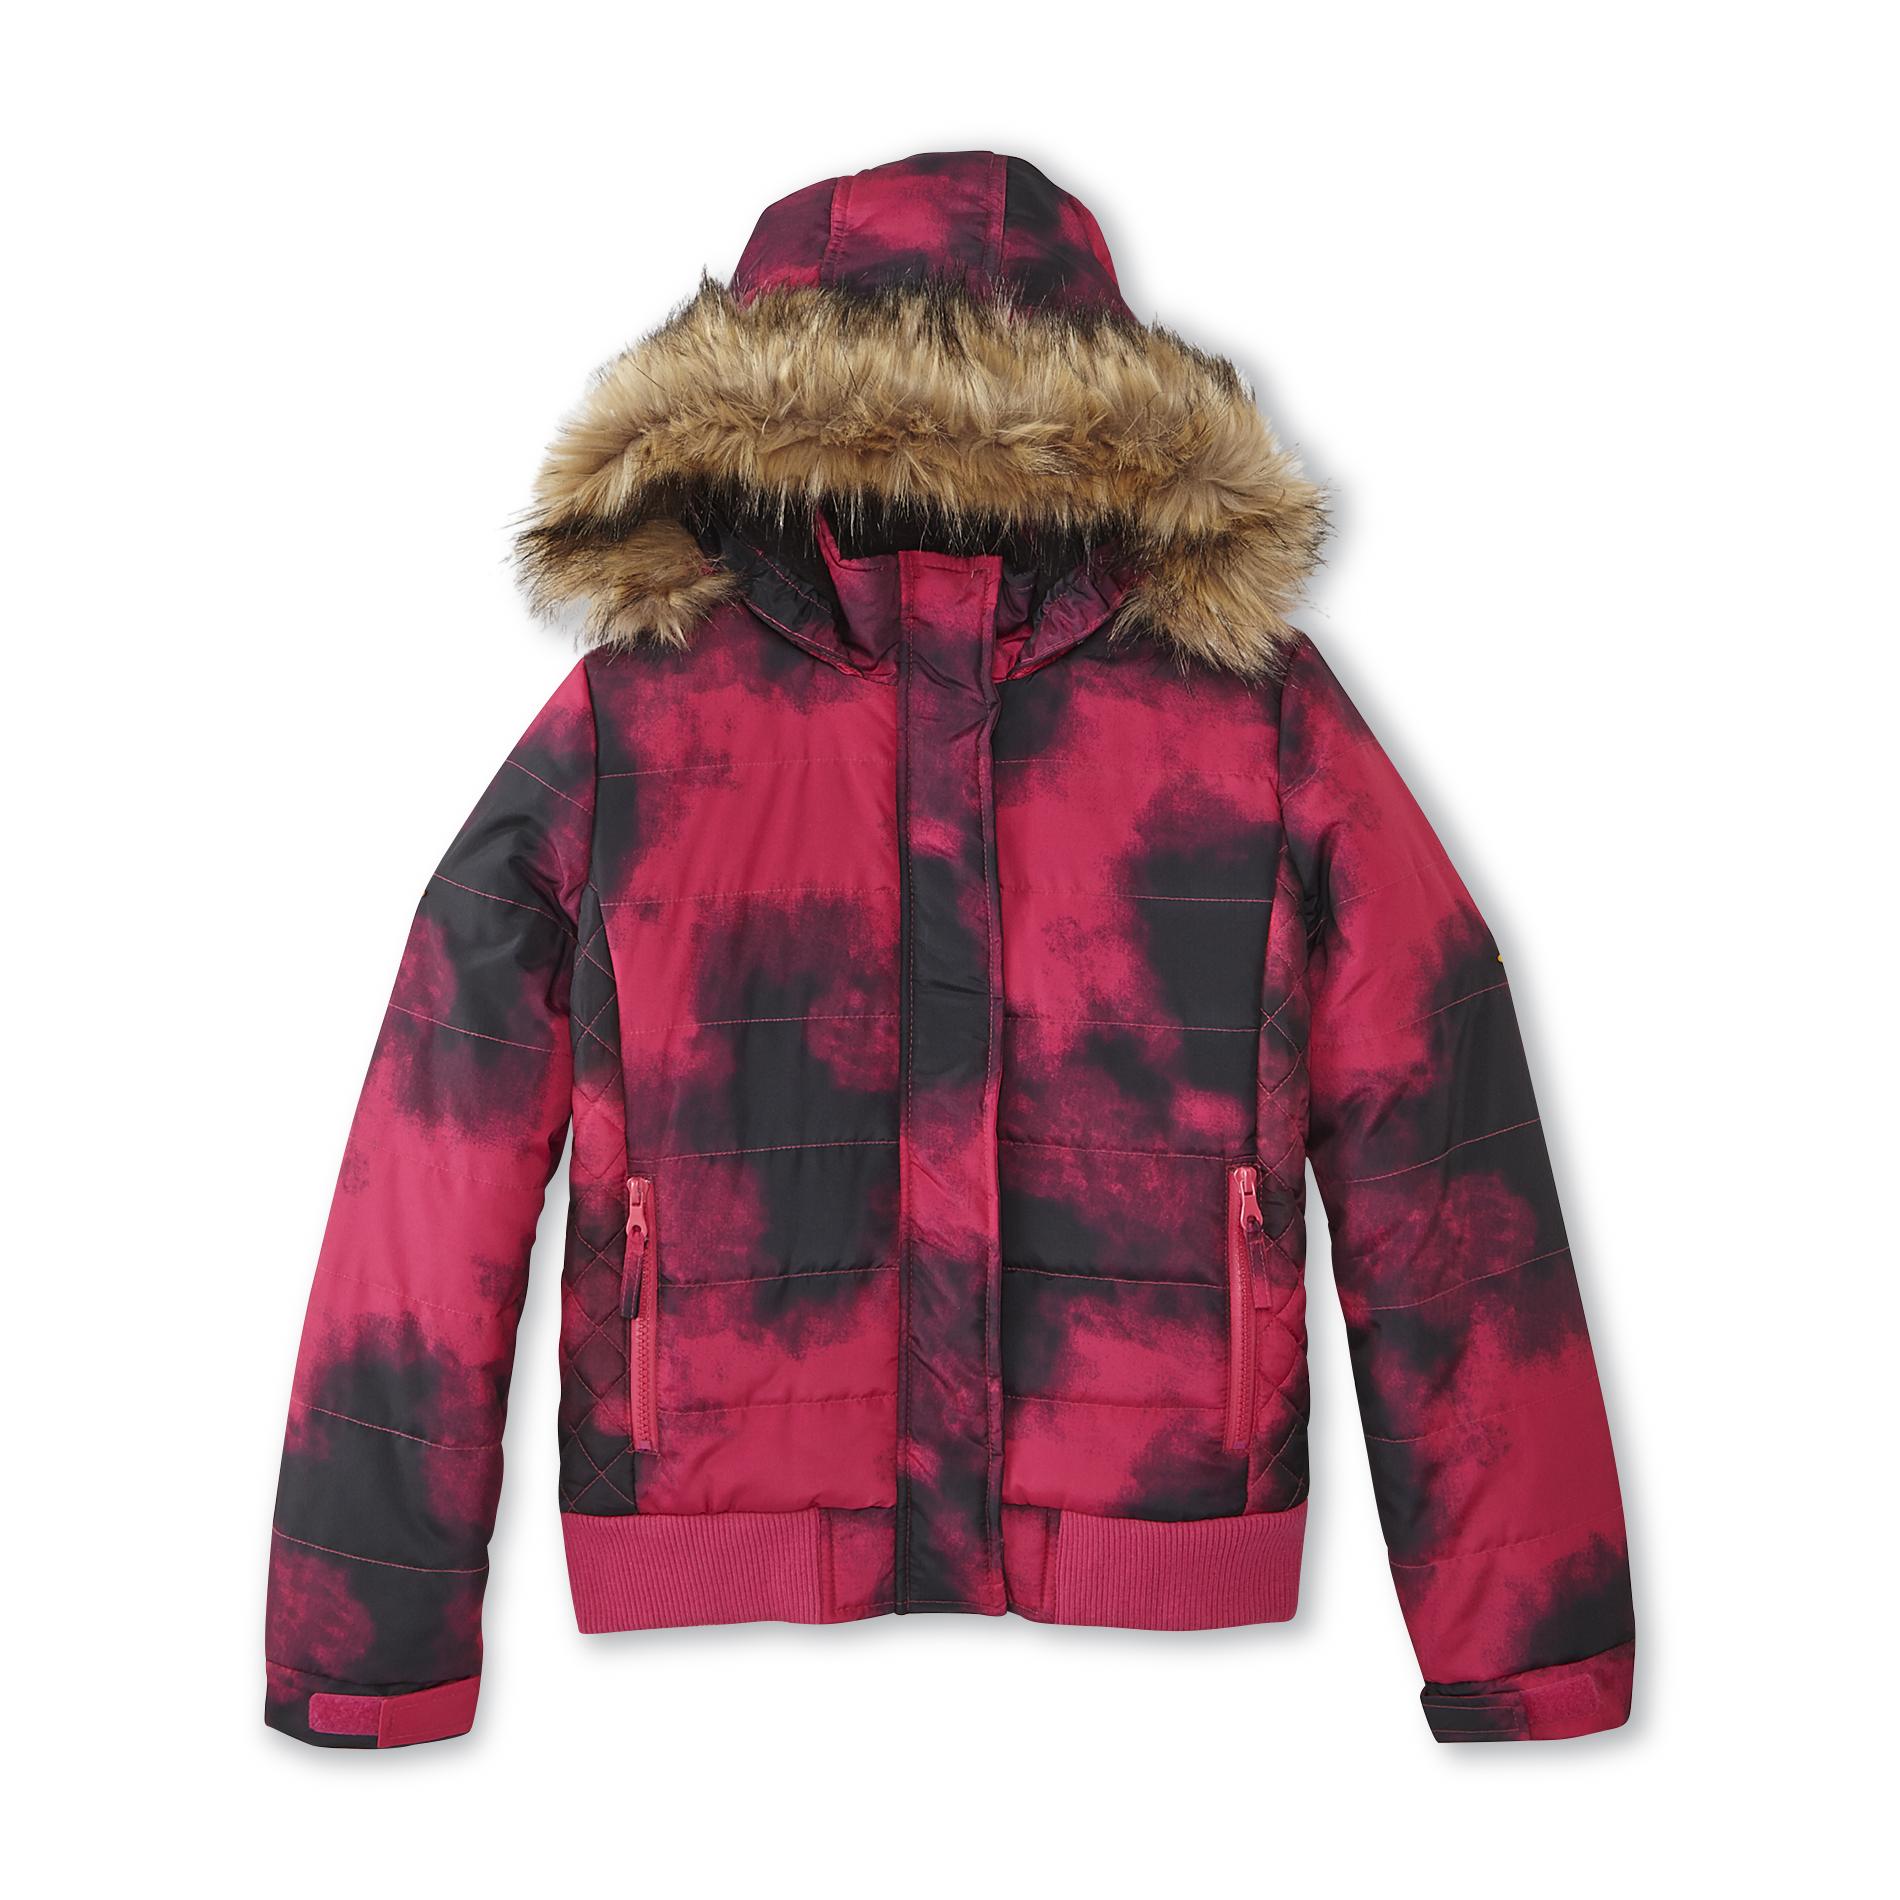 Athletech Girl's Hooded Puffer Coat - Smudge Print